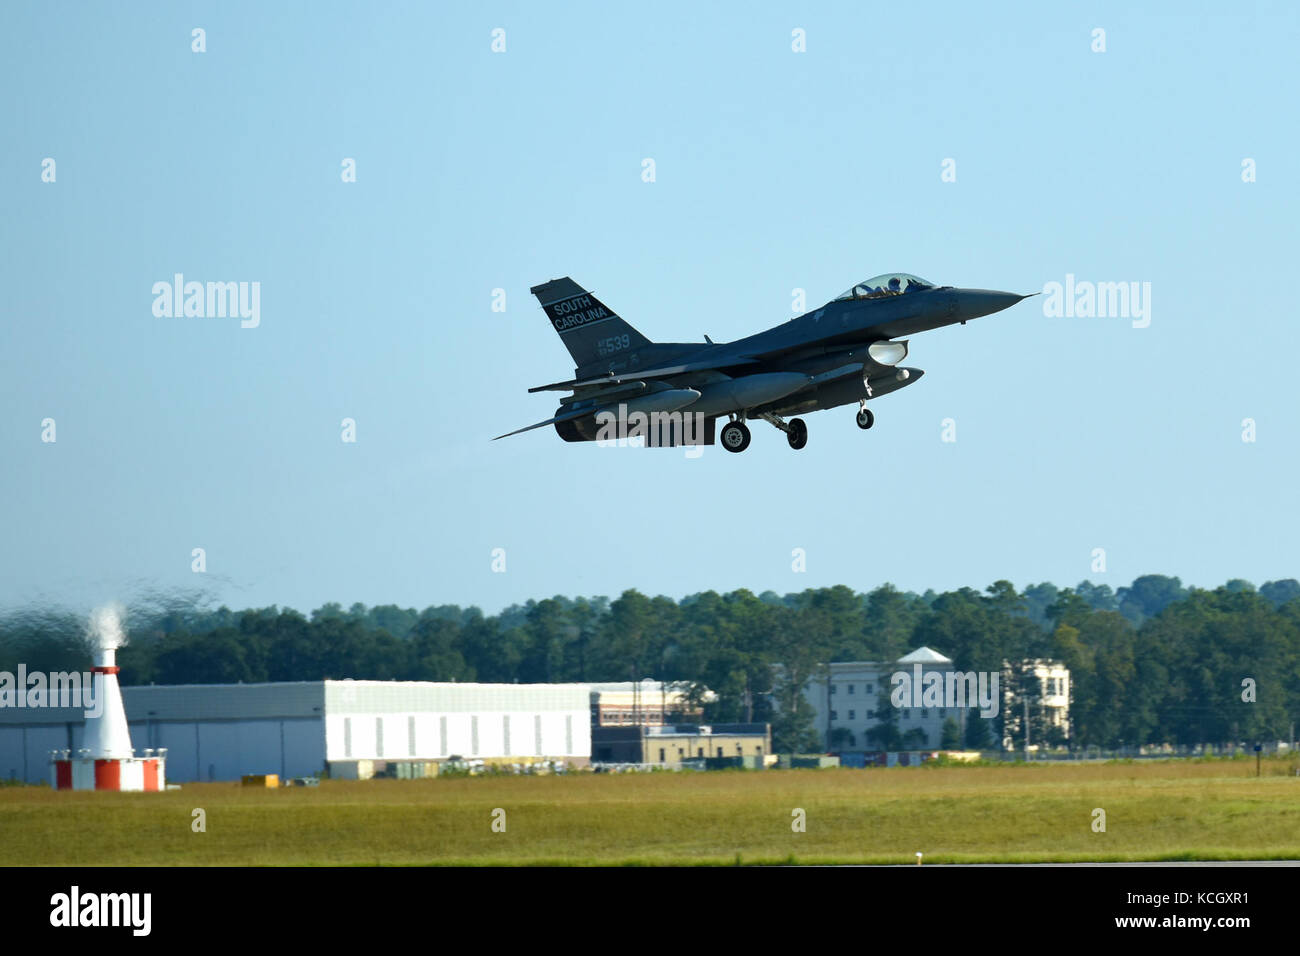 U.S. Air Force F-16 Fighting Falcon fighter jets from the South Carolina Air National Guard’s 169th Fighter Wing at McEntire Joint National Guard Base, launch to relocate in preparation for Hurricane Irma’s potential impact, Sept. 9, 2017. Hurricane Irma peaked as a Category 5 hurricane in the Atlantic Ocean and is projected to impact parts of S.C. (U.S. Air National Guard photo by Master Sgt. Caycee Watson) Stock Photo